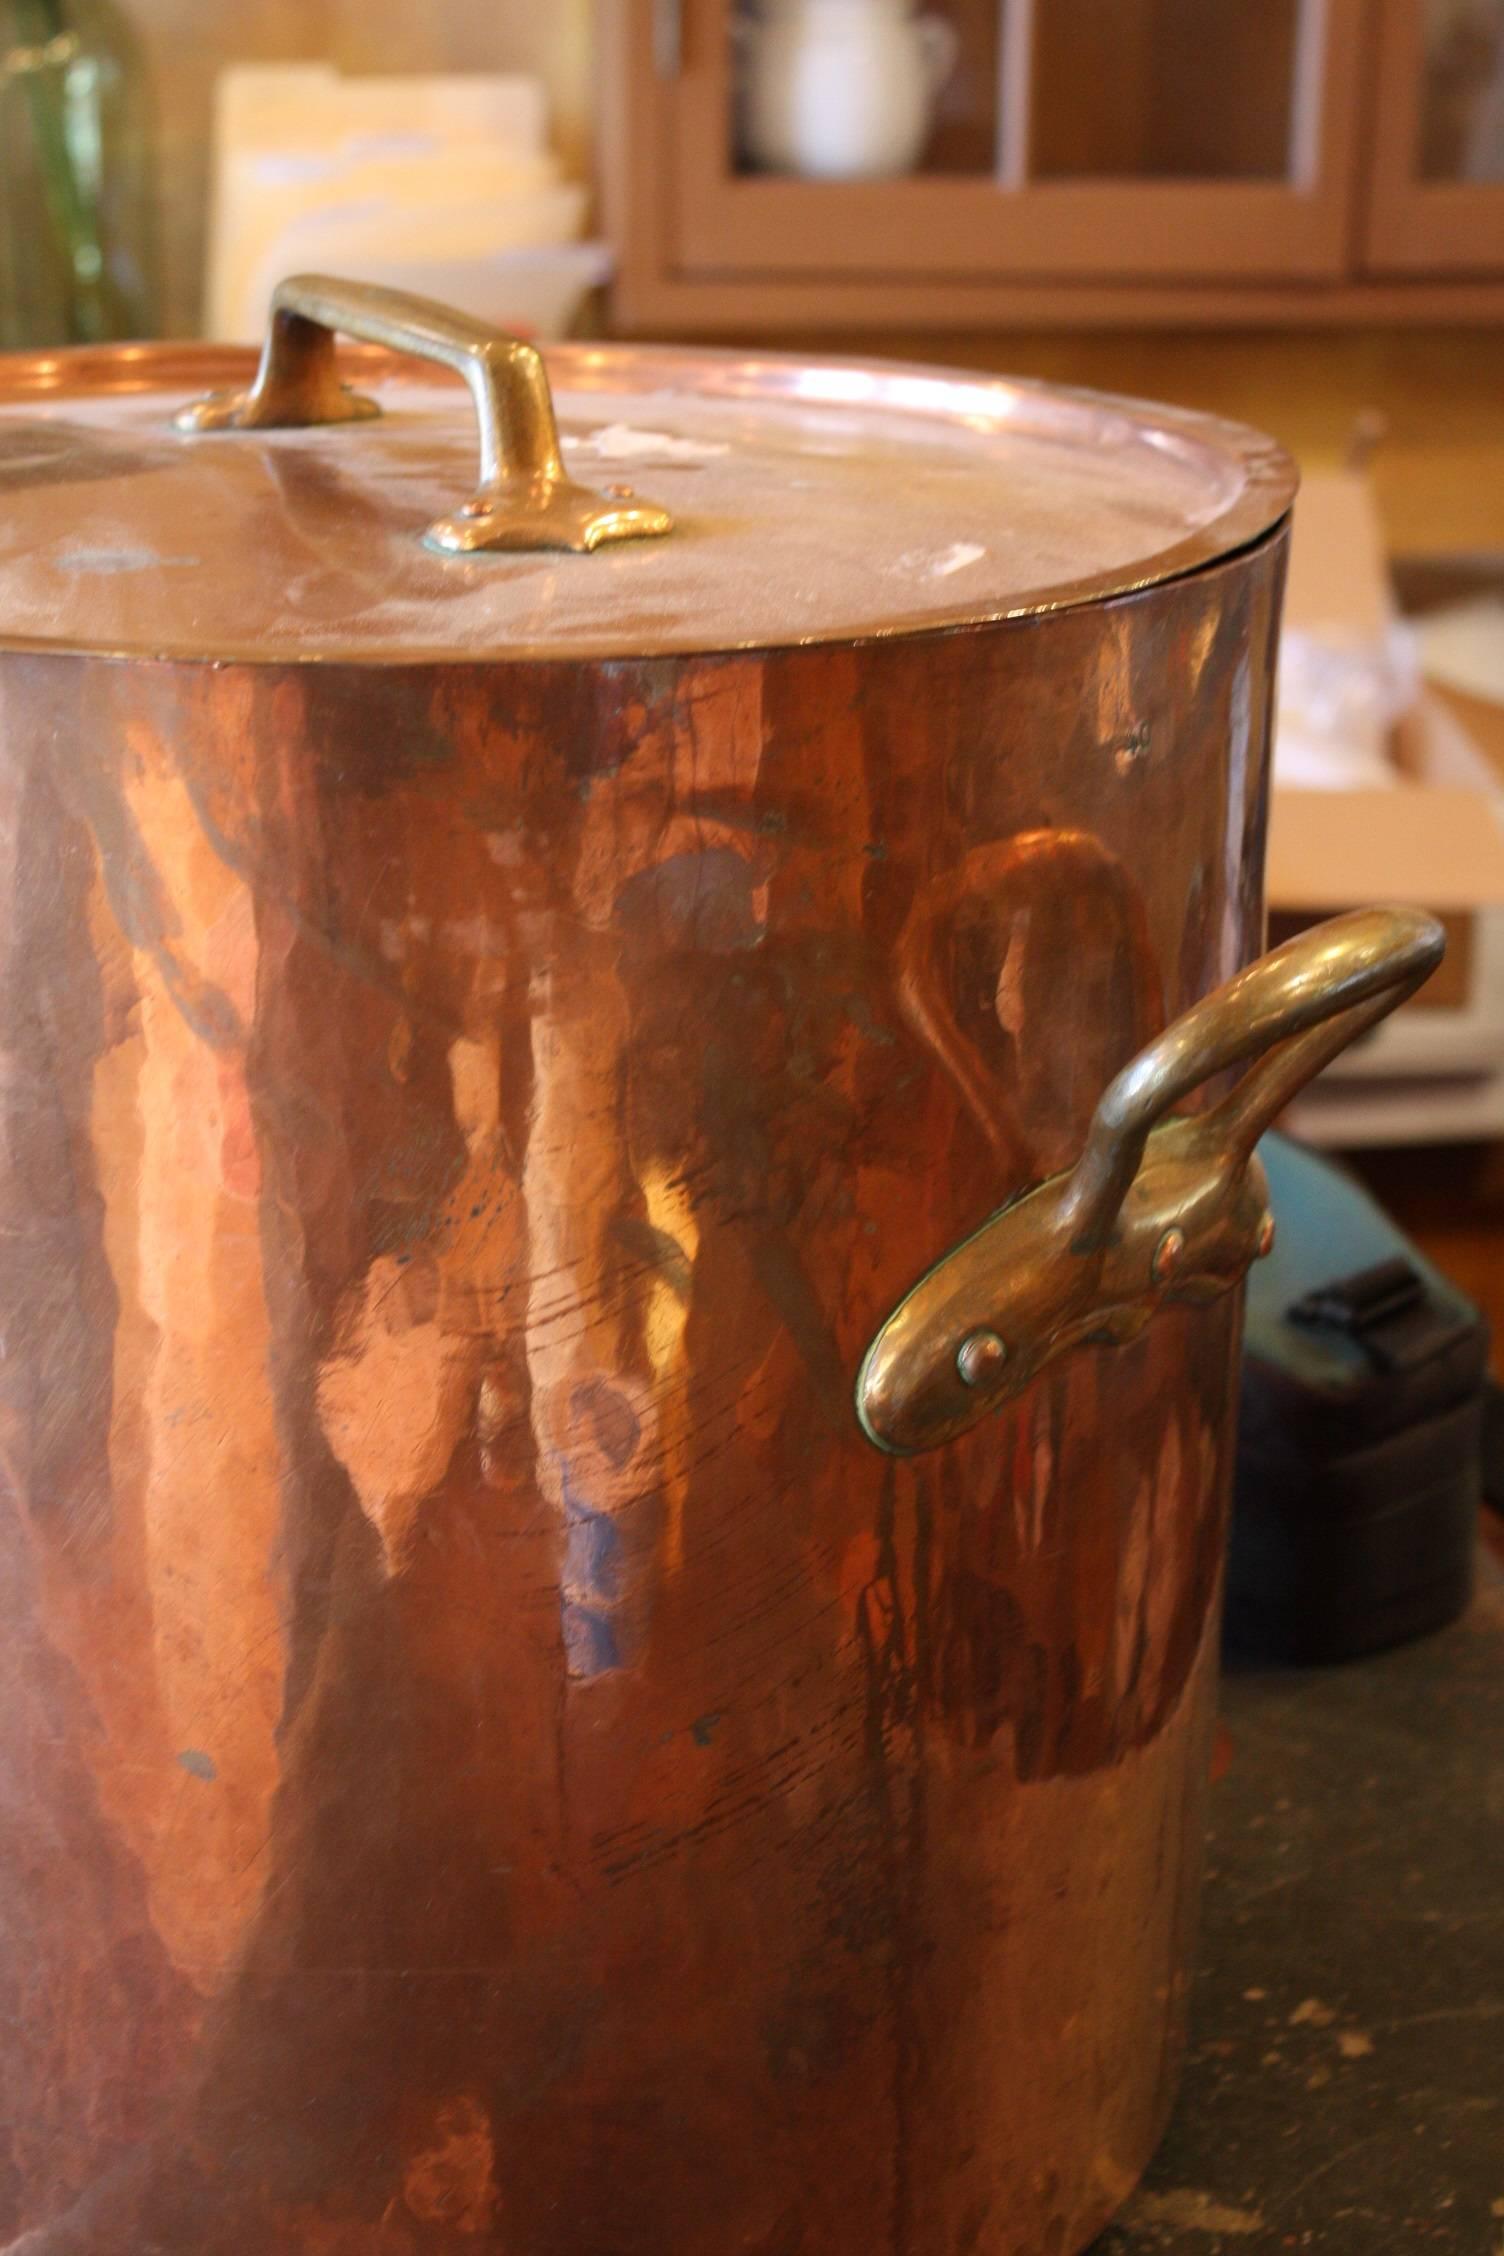 19th century copper stock pot with lid. Such a great addition to your kitchen.